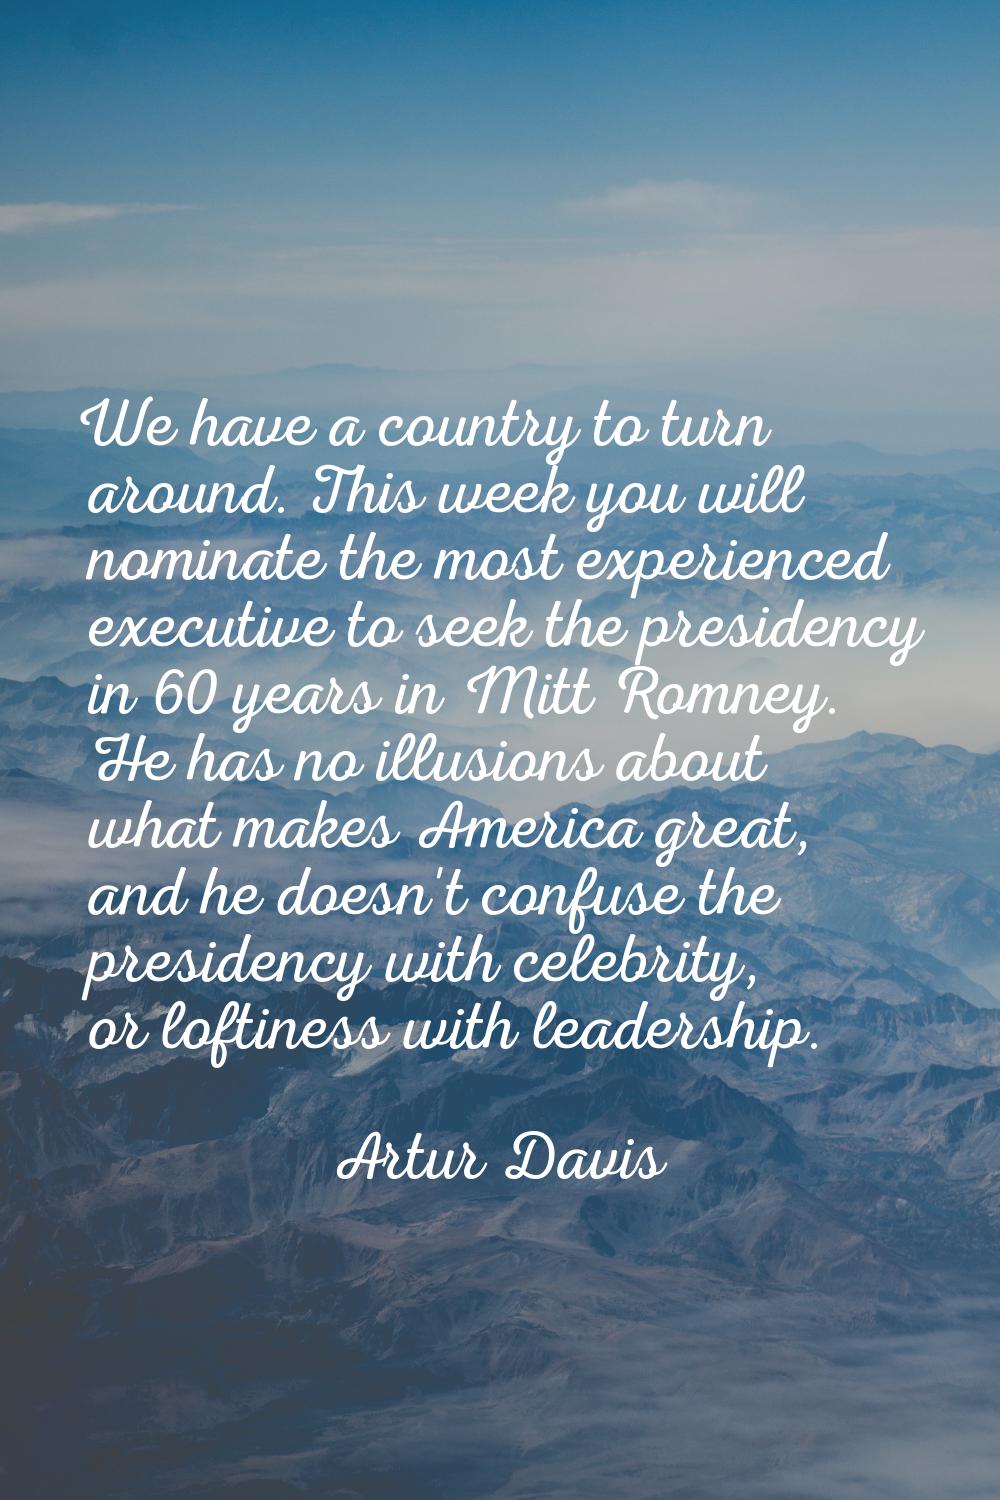 We have a country to turn around. This week you will nominate the most experienced executive to see